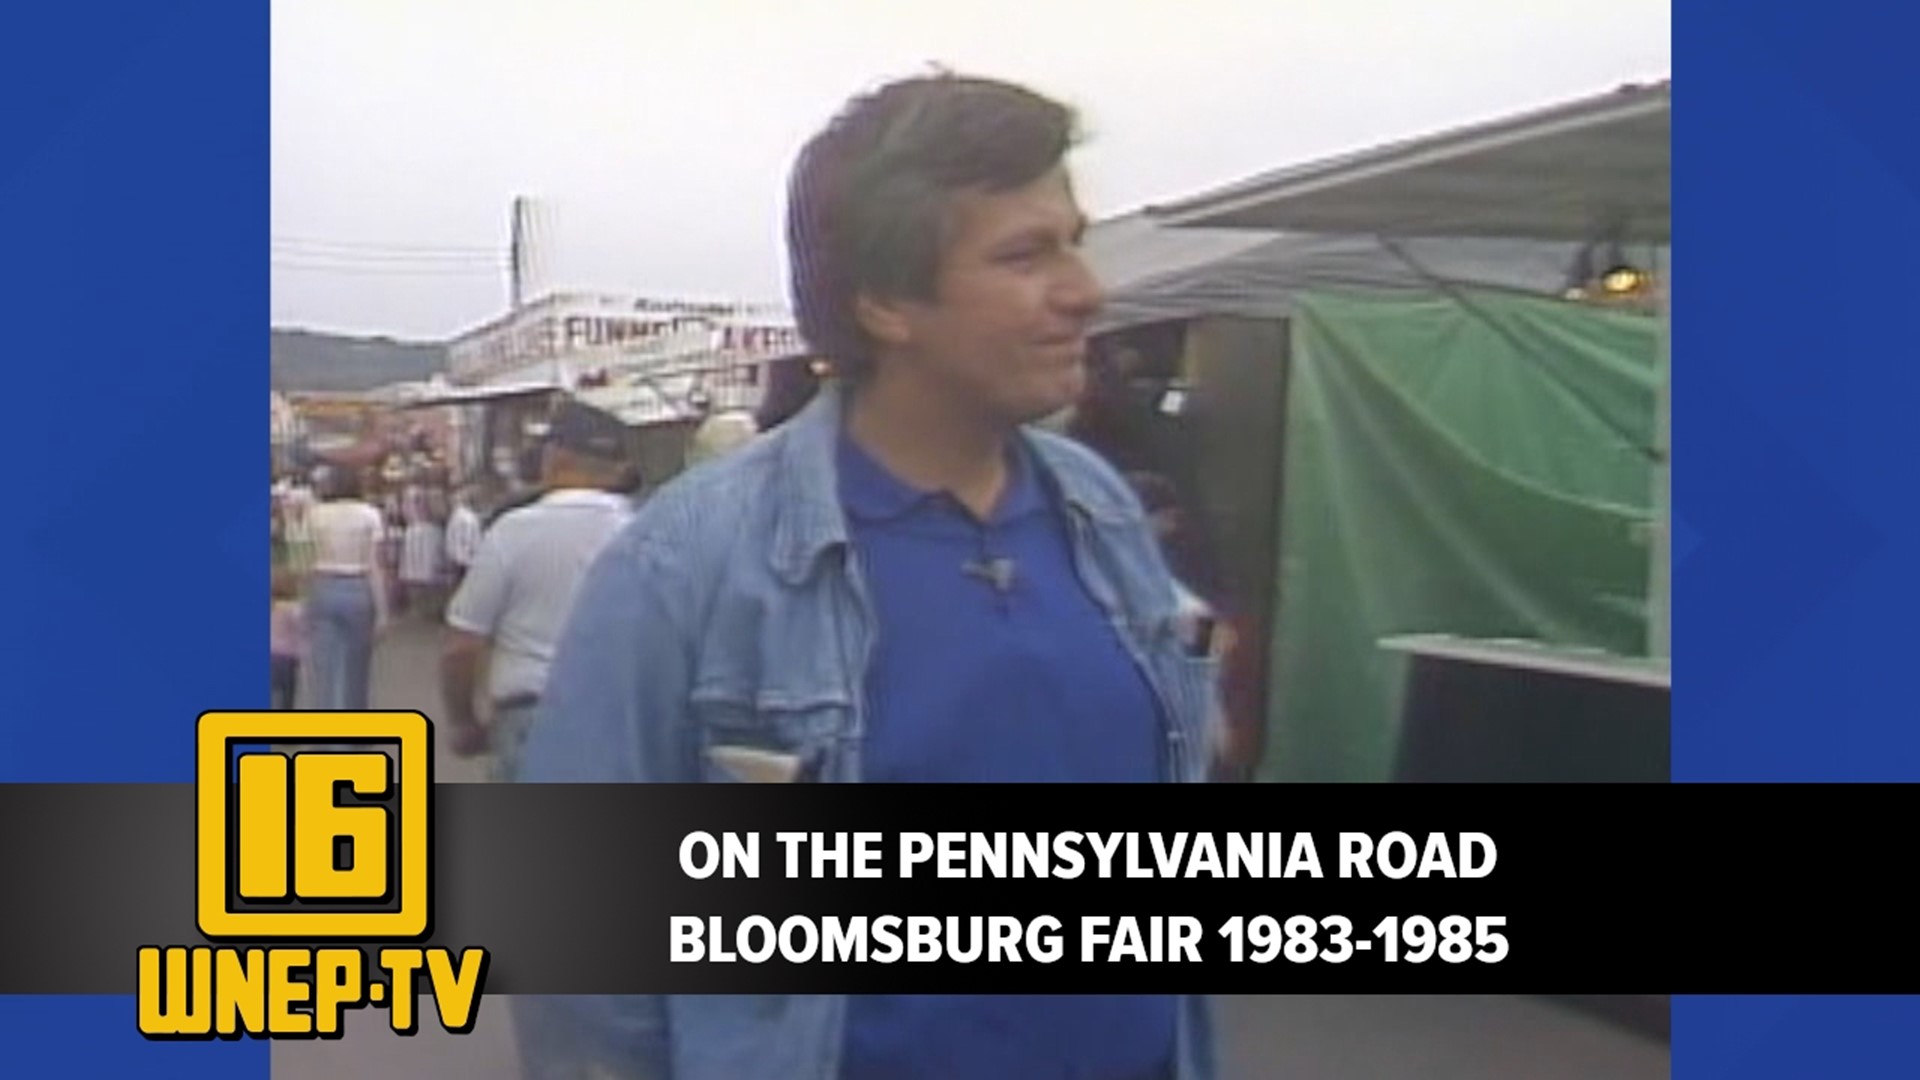 Join Mike Stevens as he takes the Pennsylvania road to the Bloomsburg Fair.